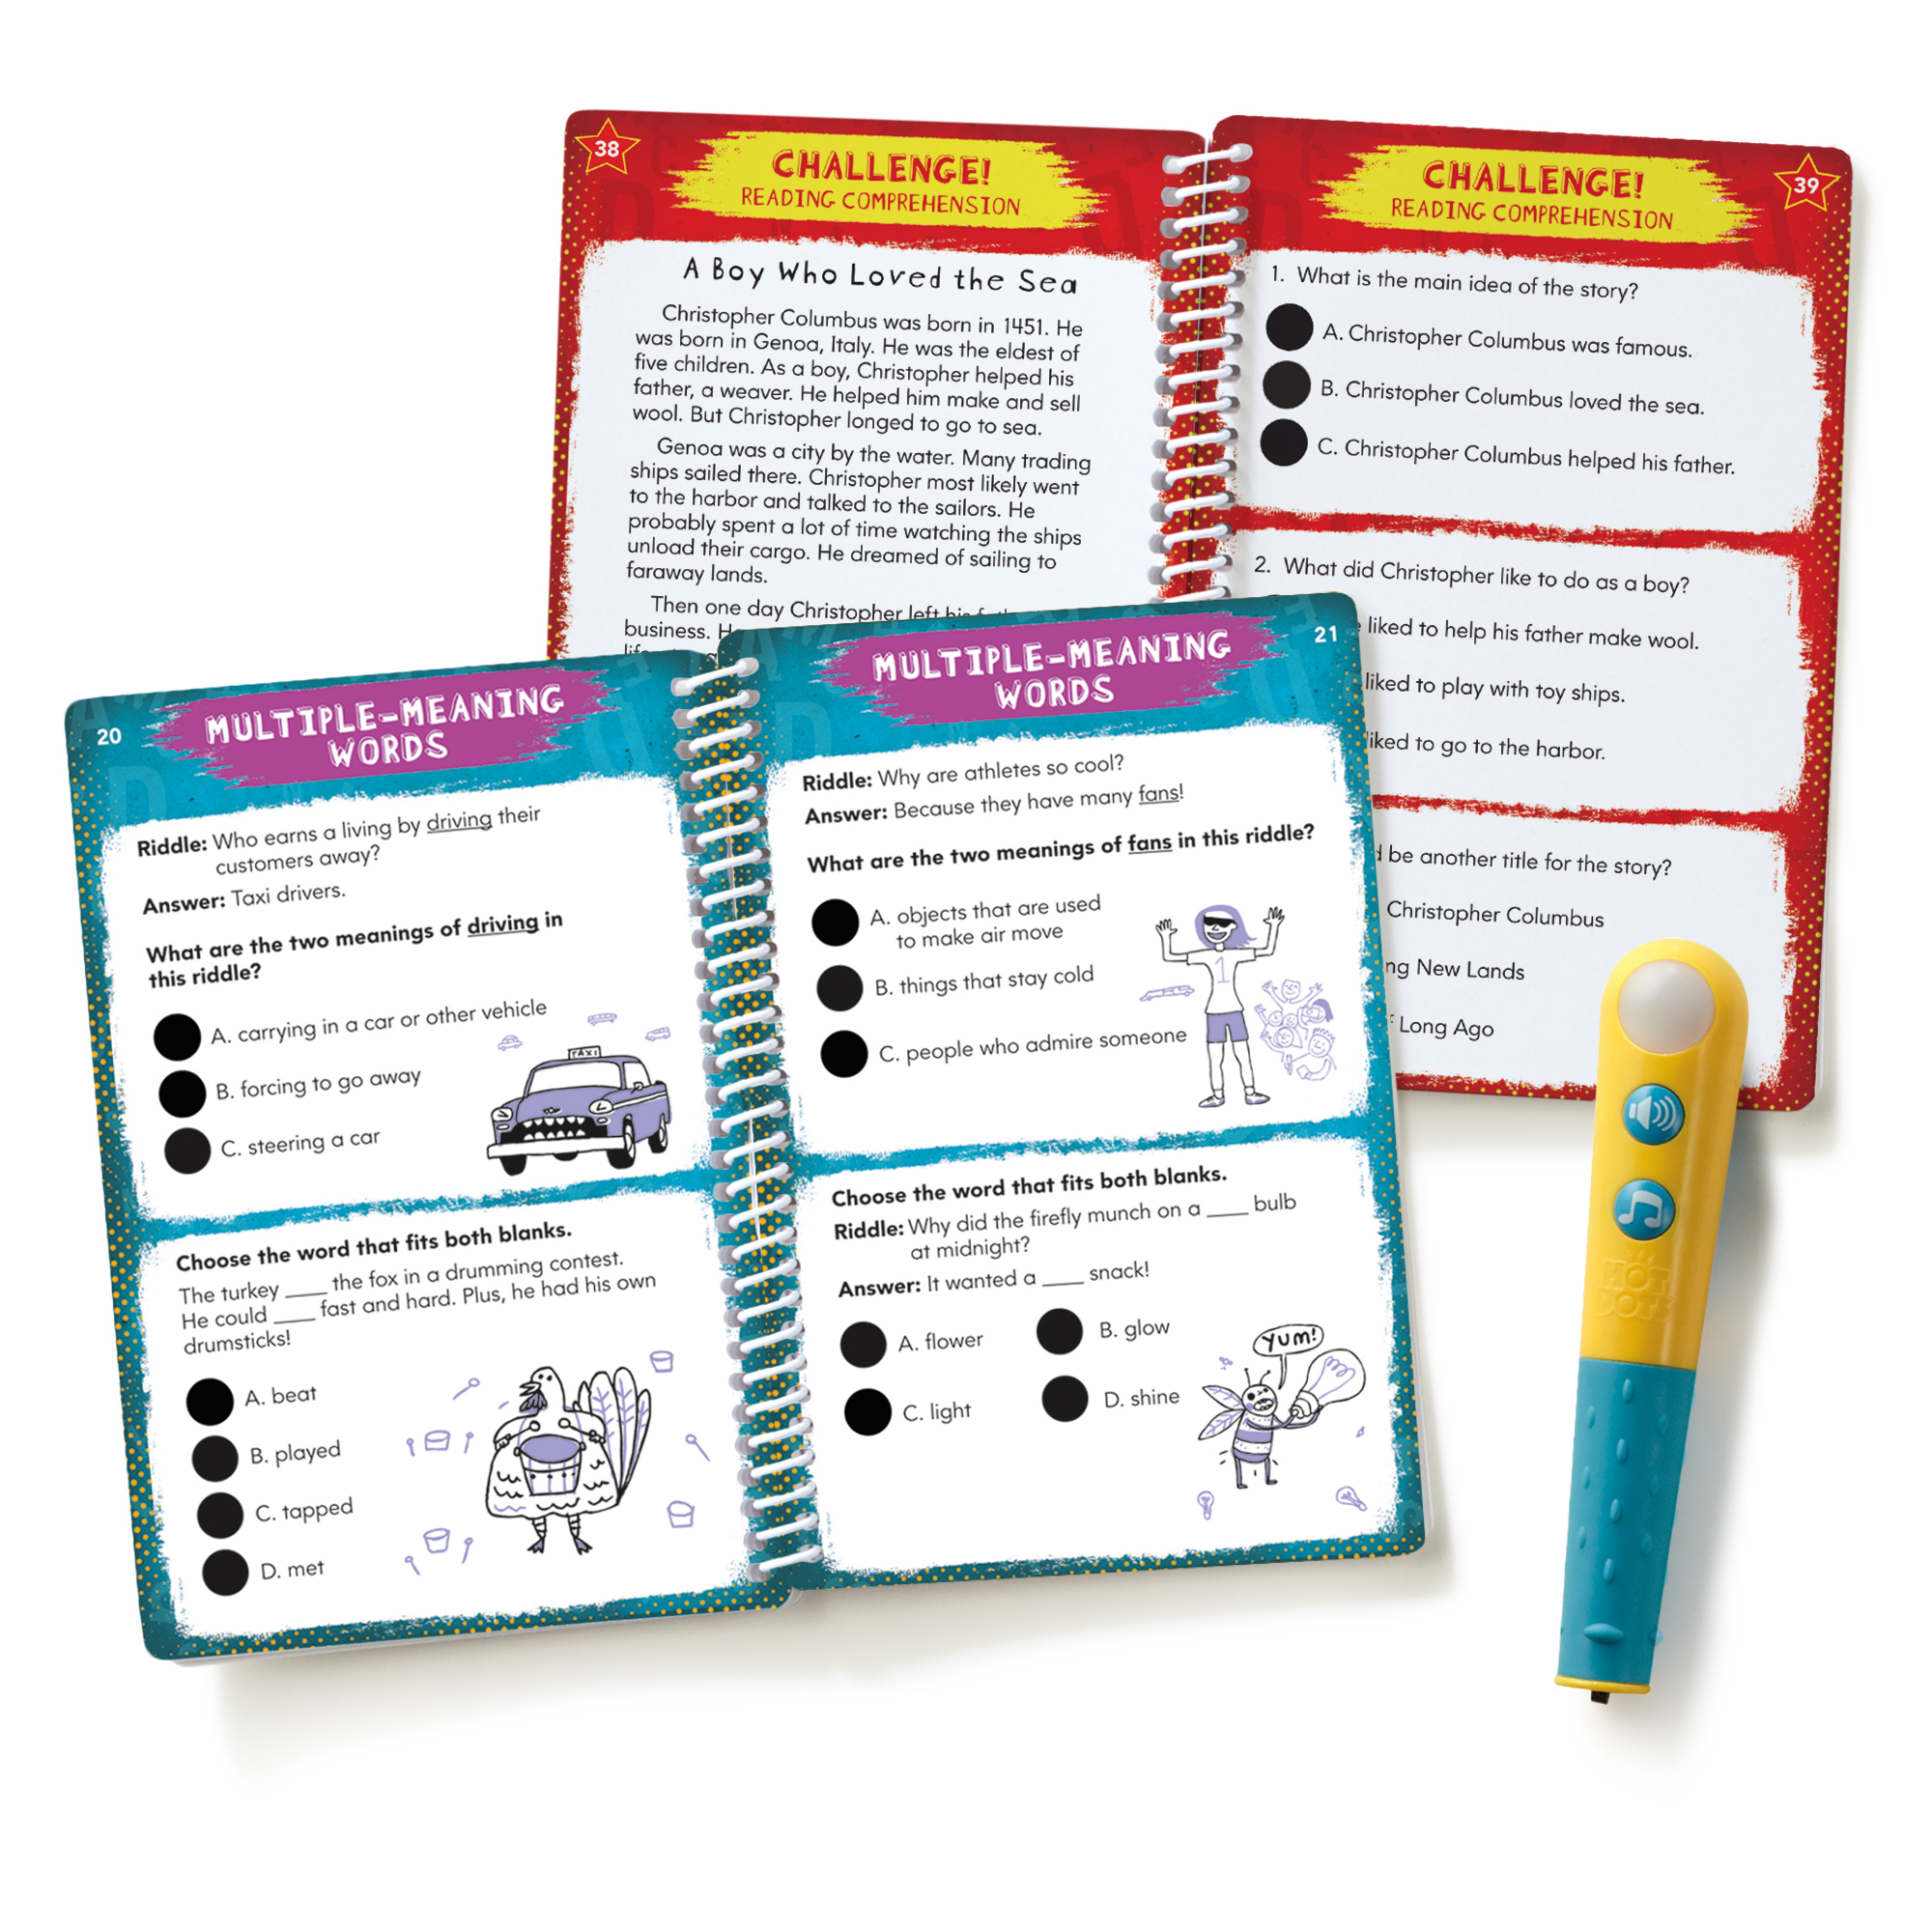 The Teachers' Lounge®  Hot Dots® Let's Master Grade 3 Reading